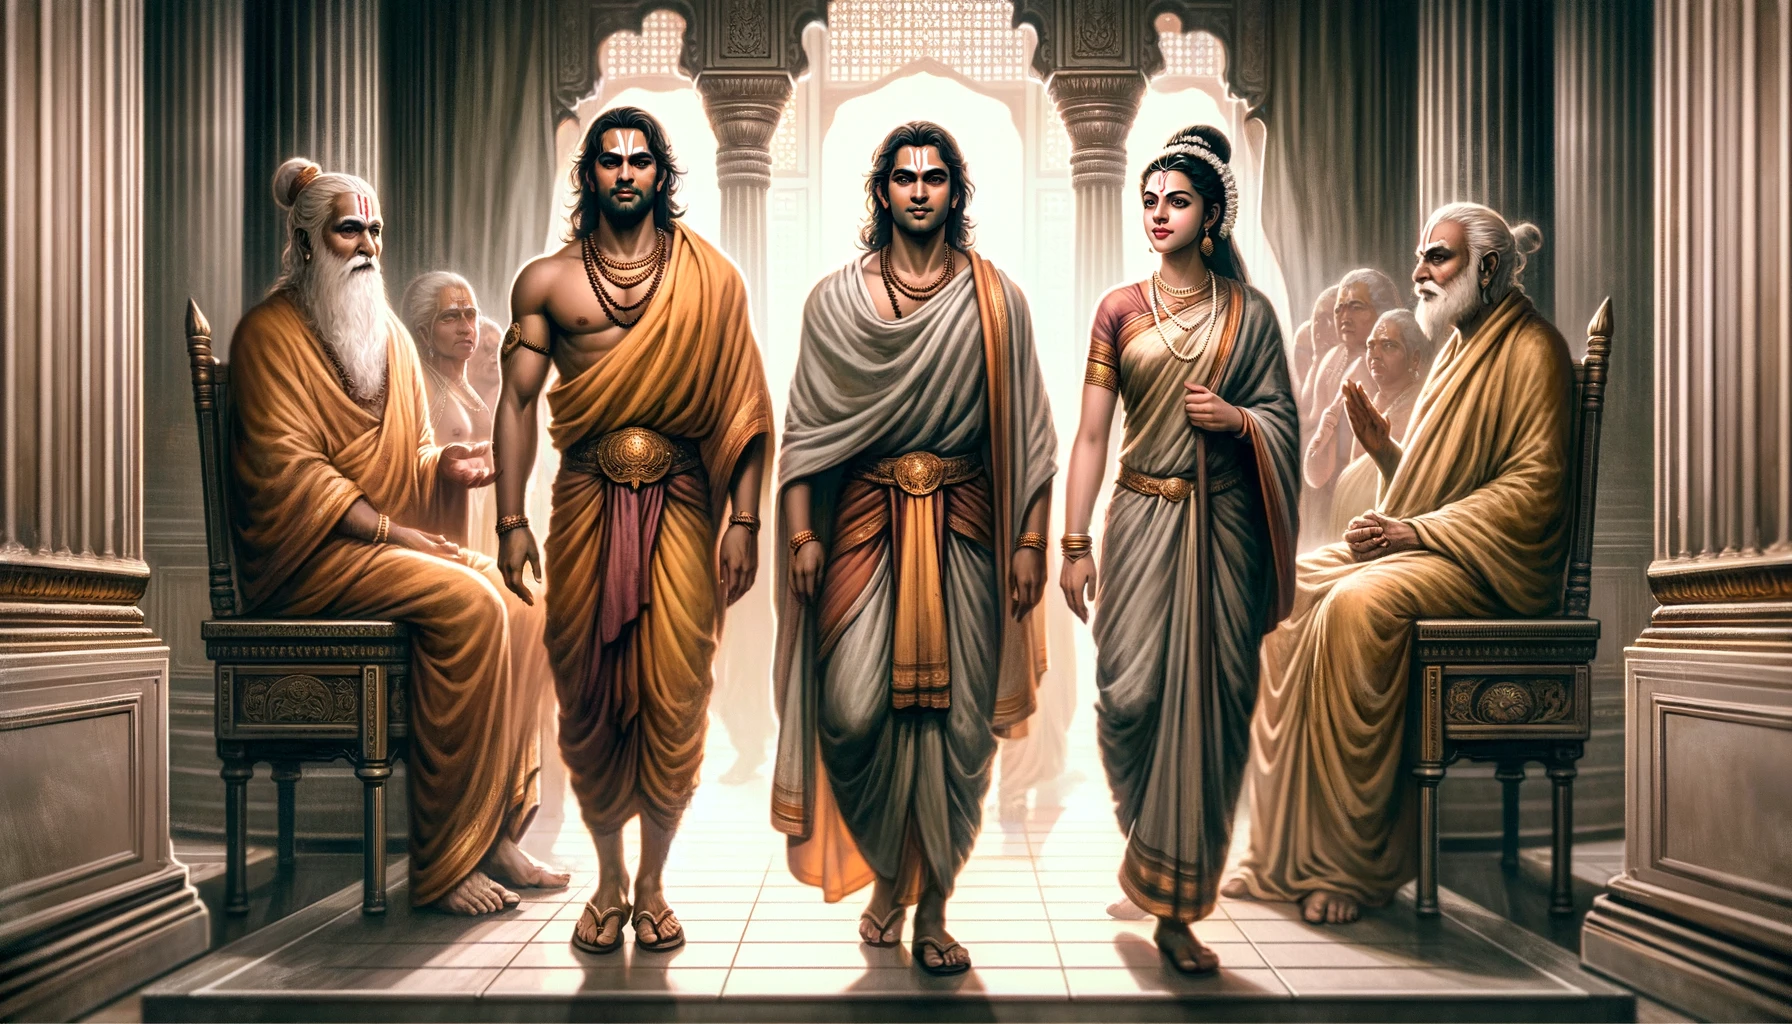 Rama, Lakshmana and Sita Approach King Dasharatha for Permission to Leave